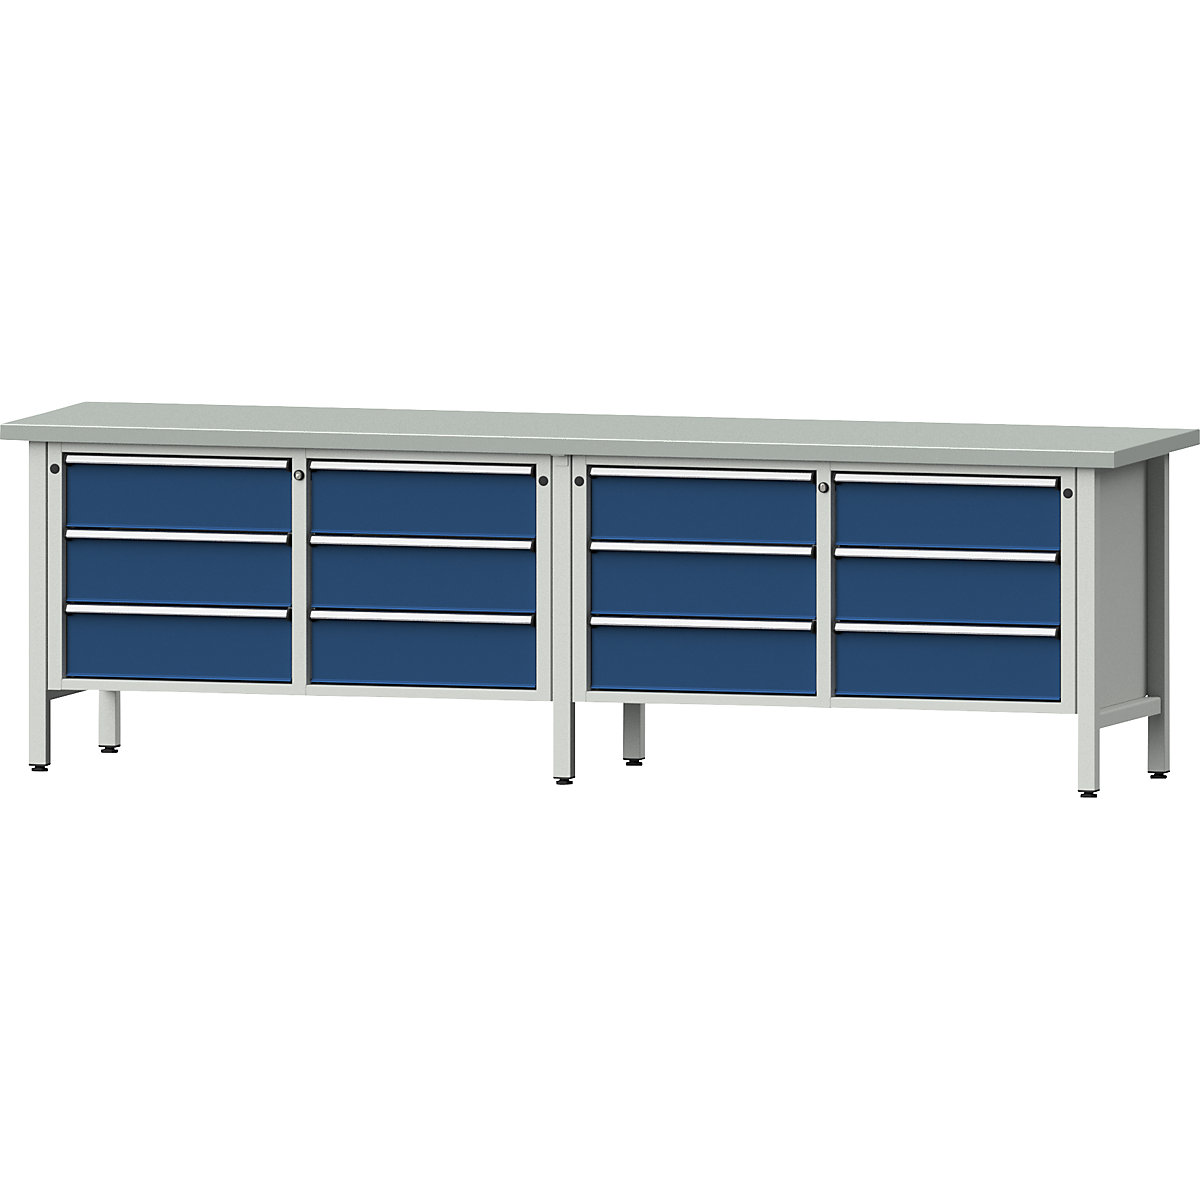 Workbench width 2800 mm, frame construction – ANKE, 12 drawers, 180 mm with partial extension, sheet steel covered worktop-9